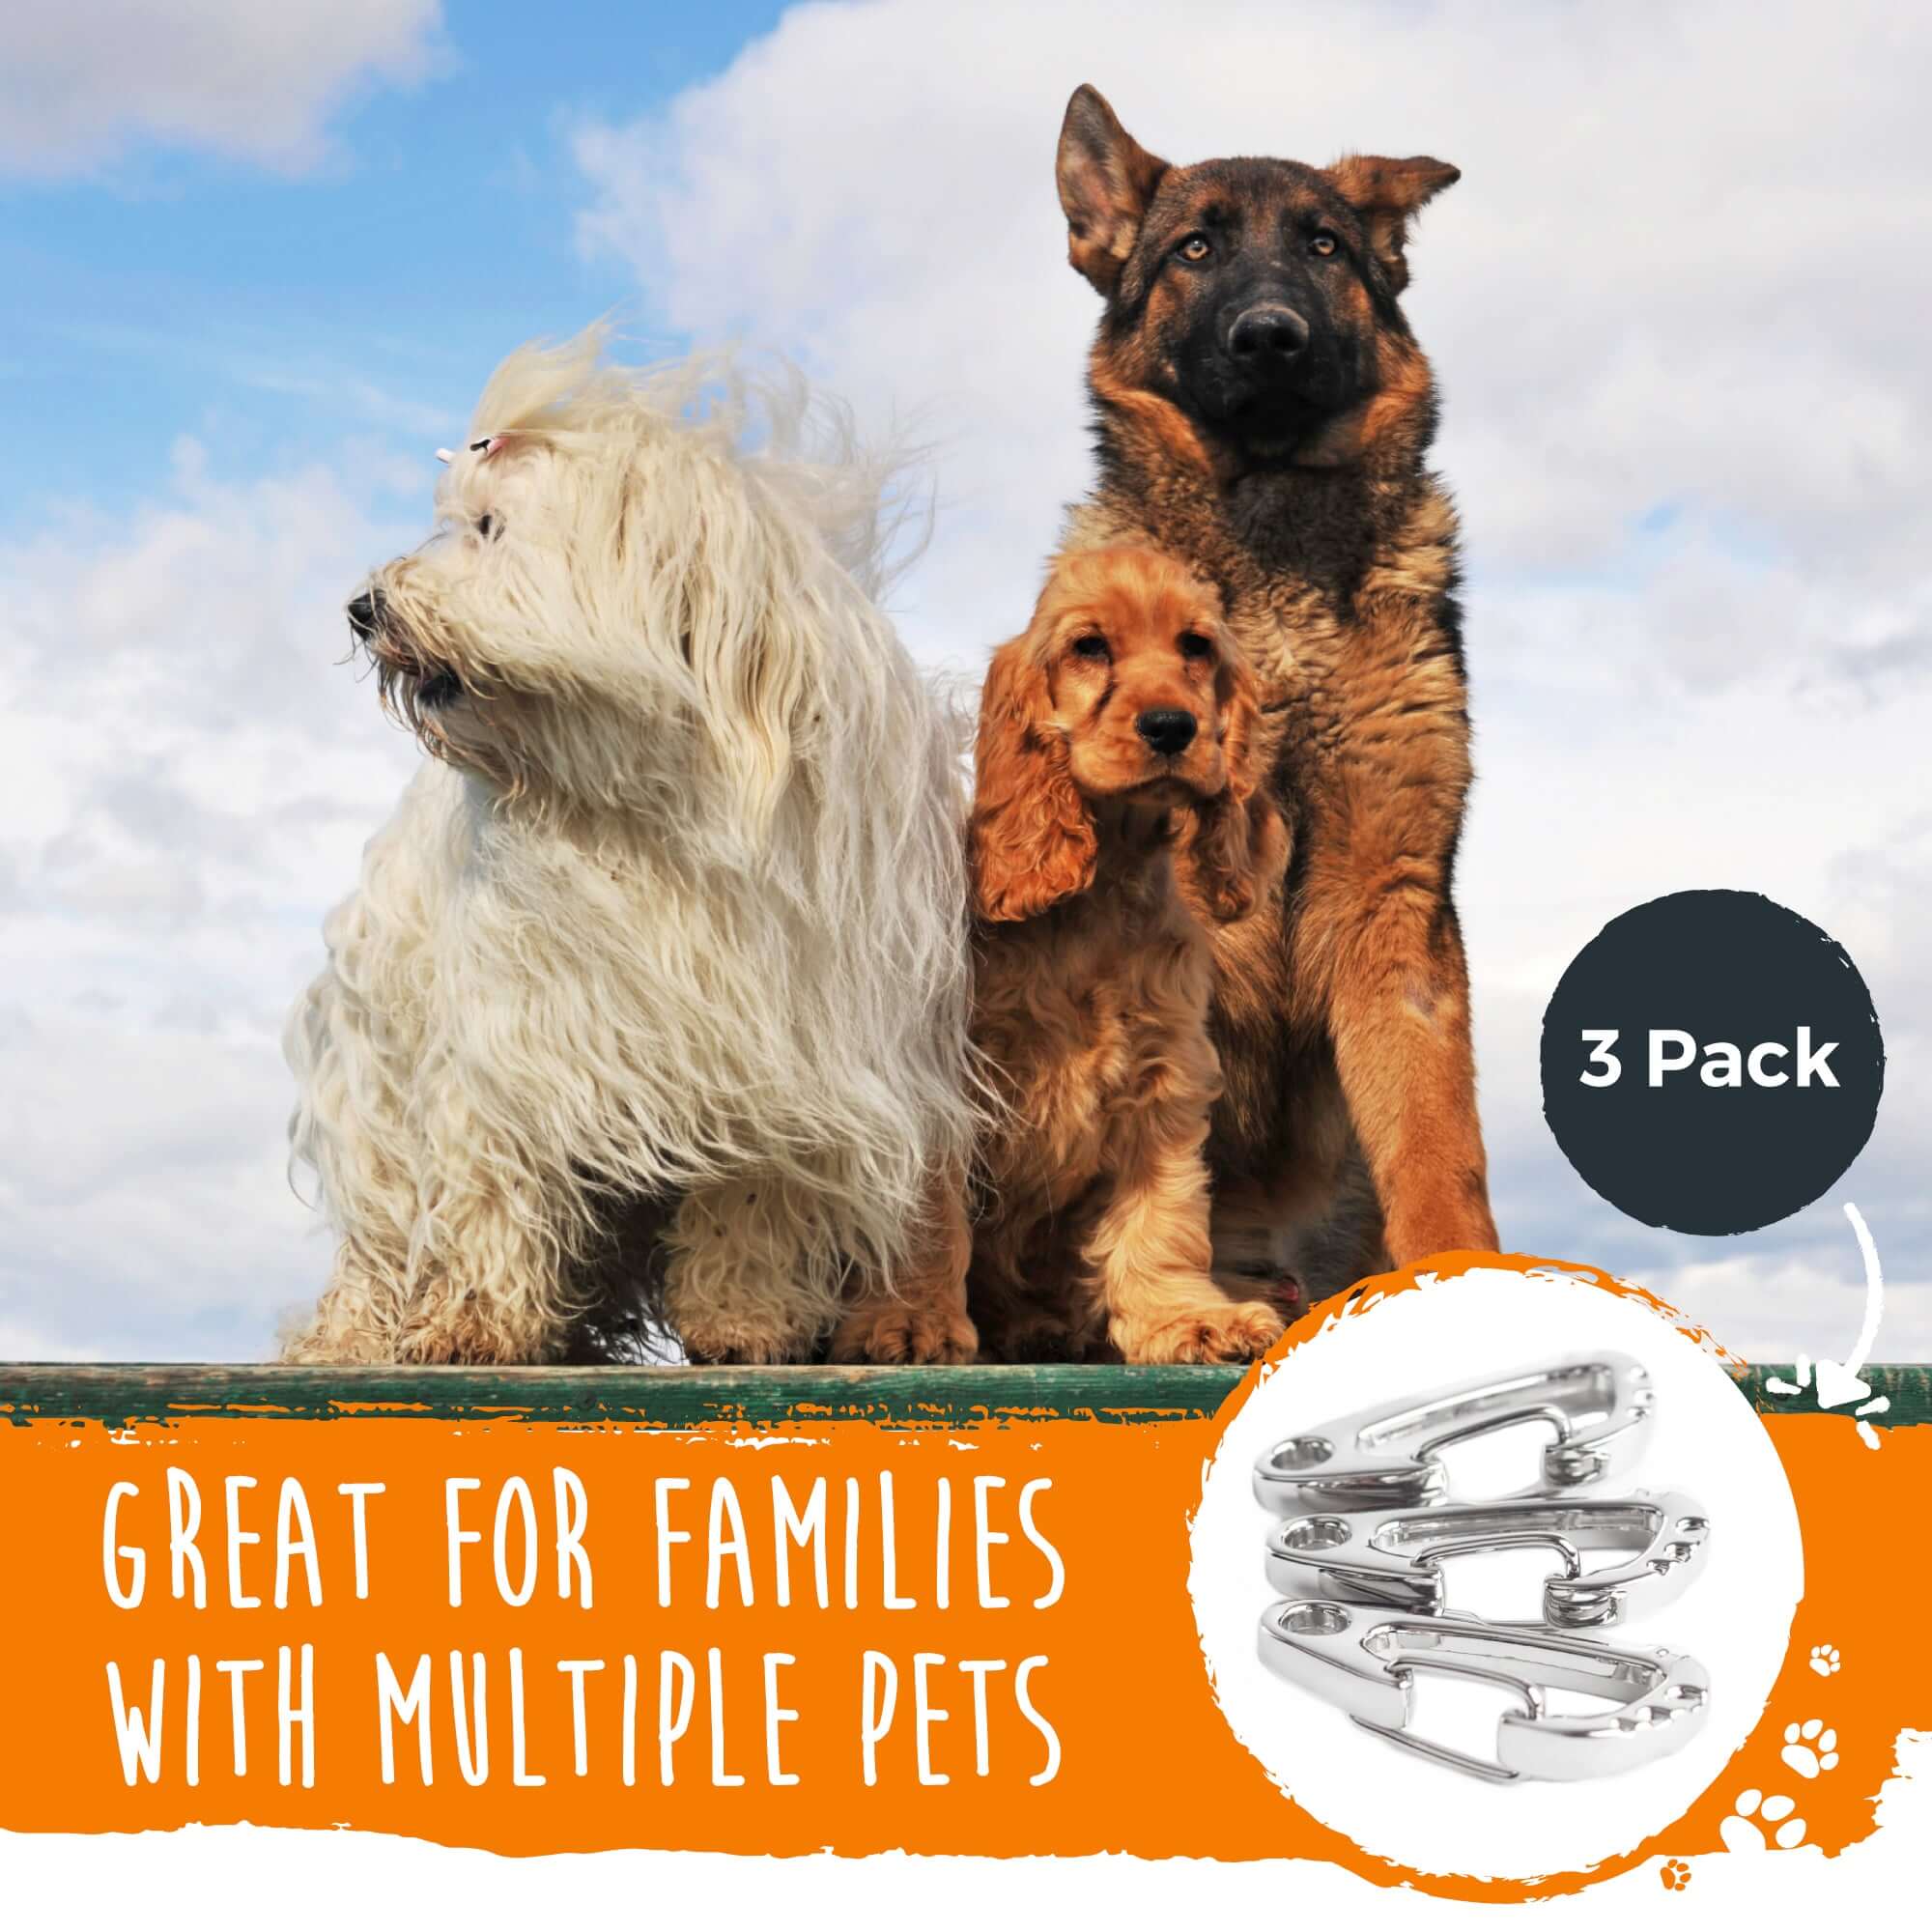 Mighty Paw Dog Tag Carabiner Clips: Secure ID Tag Holder for Dogs (3 Pack)